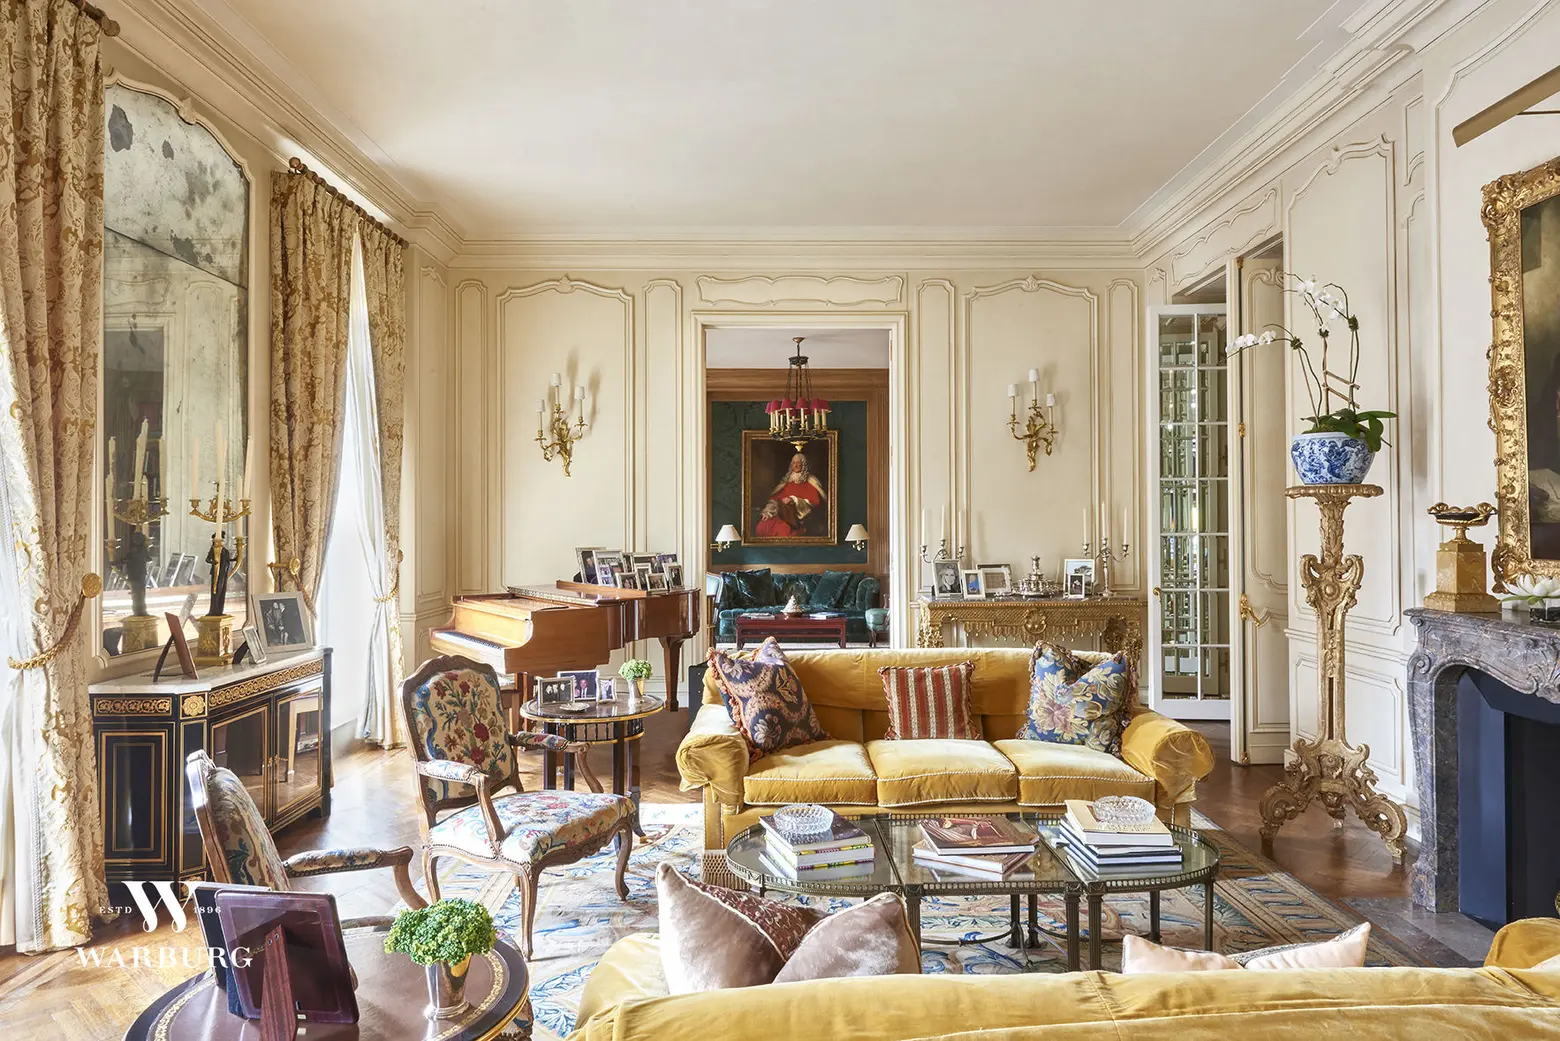 Pantone creator’s $39.5M Park Avenue pad may not be colorful, but it’s as classic as they come